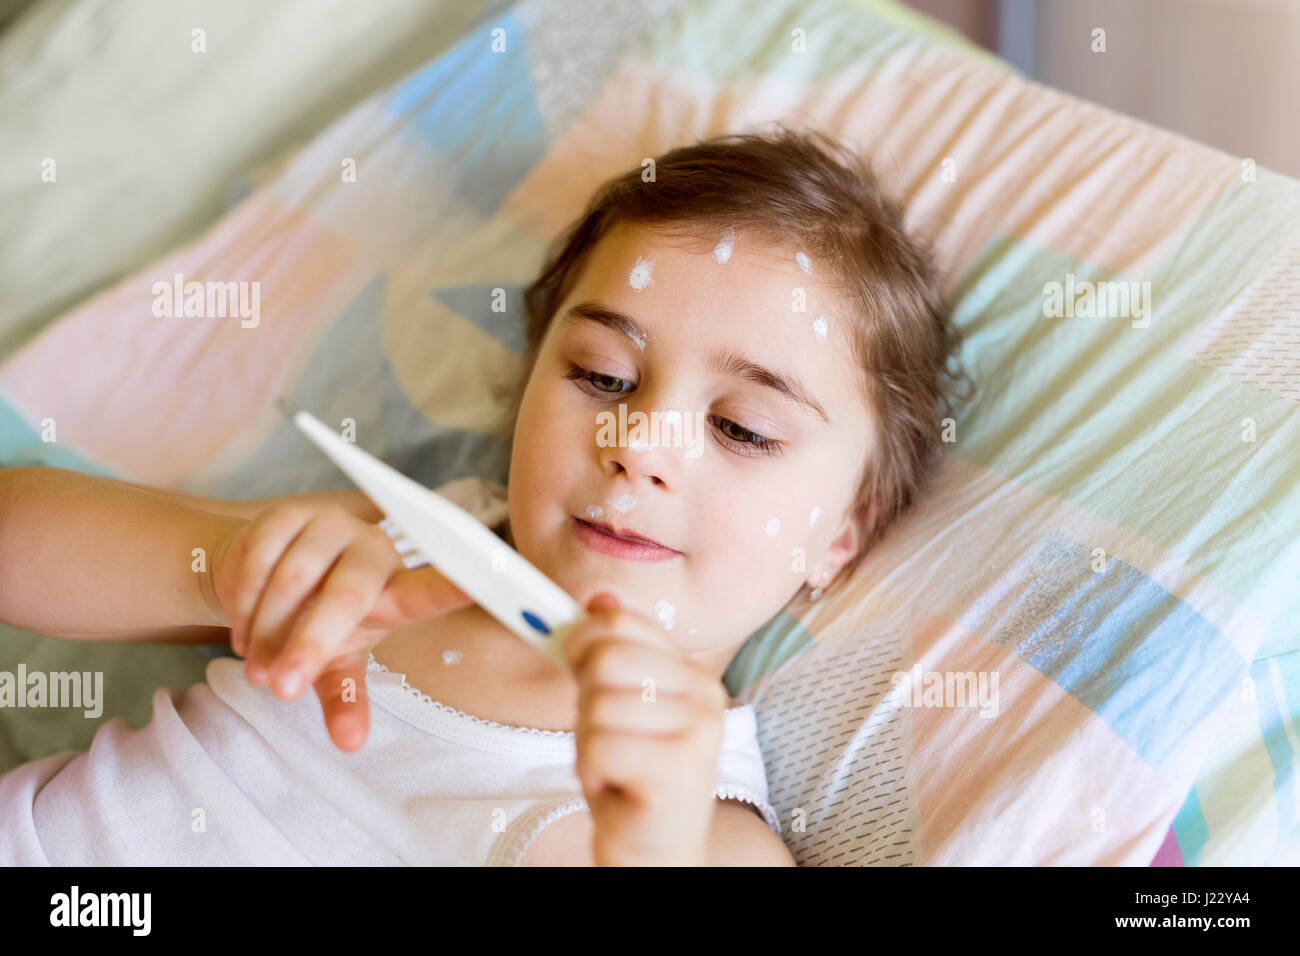 Girl having chickenpox lying in bed looking at clinical thermometer Stock Photo